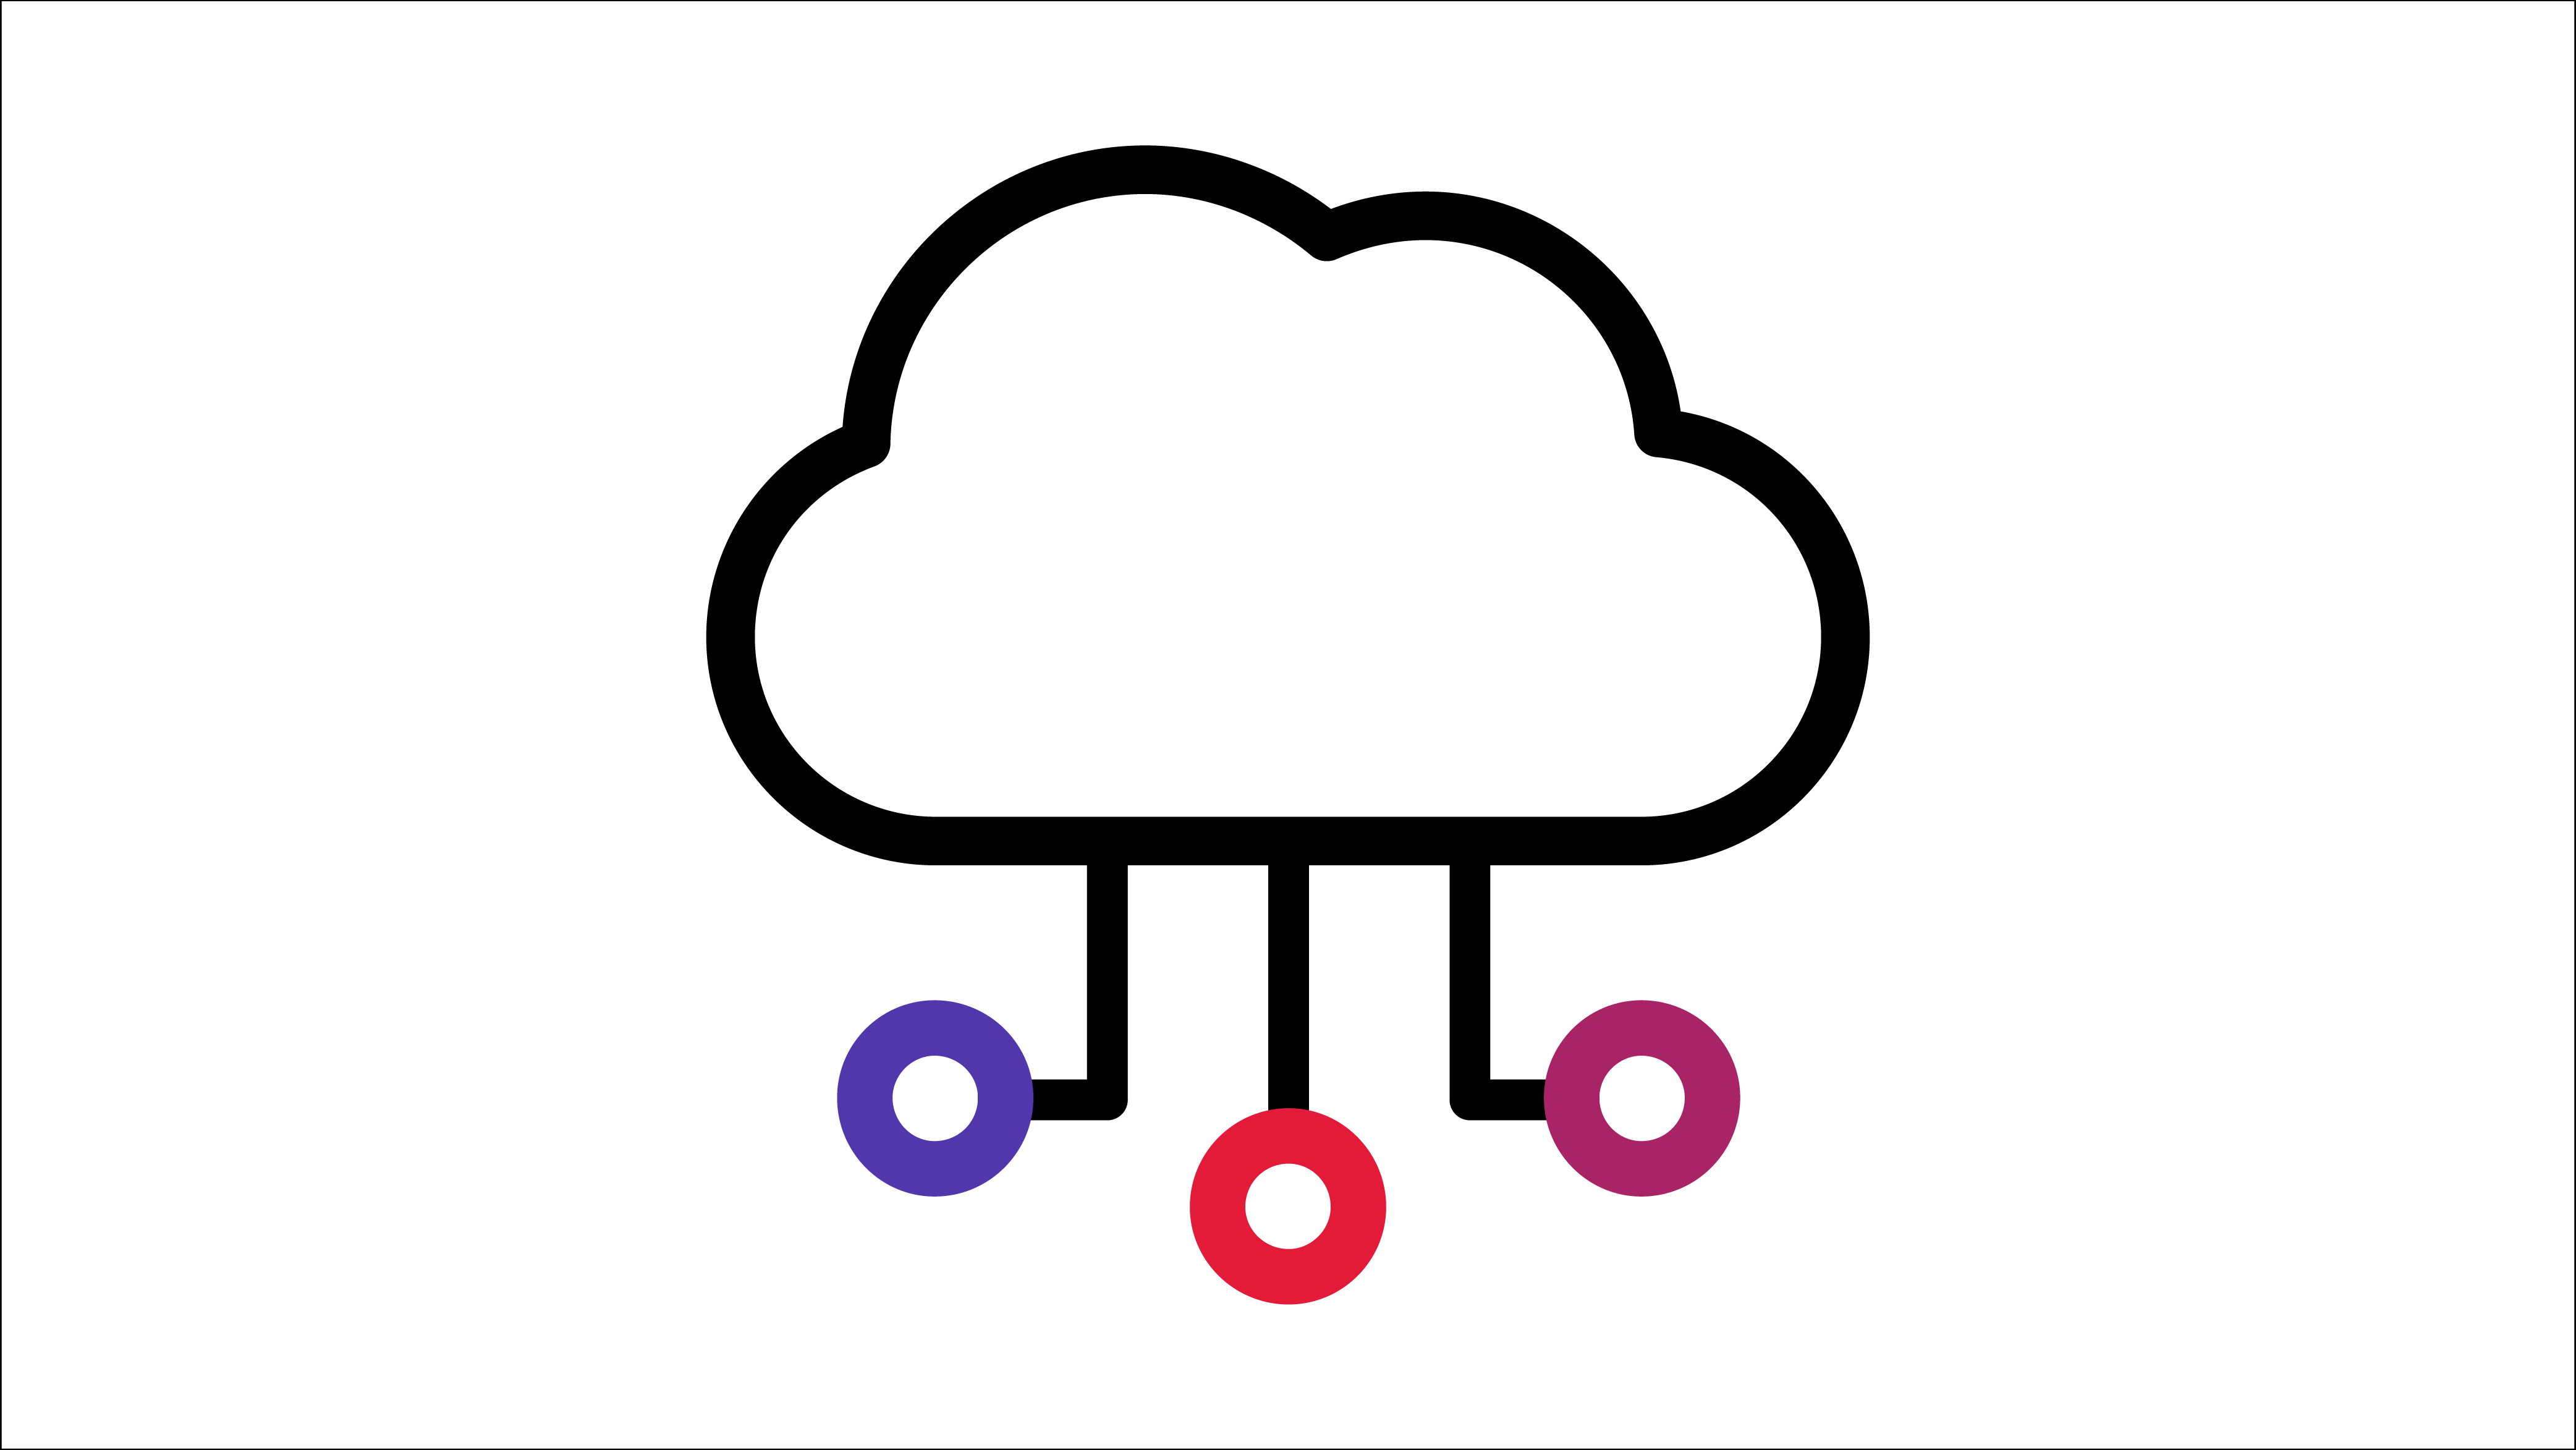 Cloud icon with three nodes